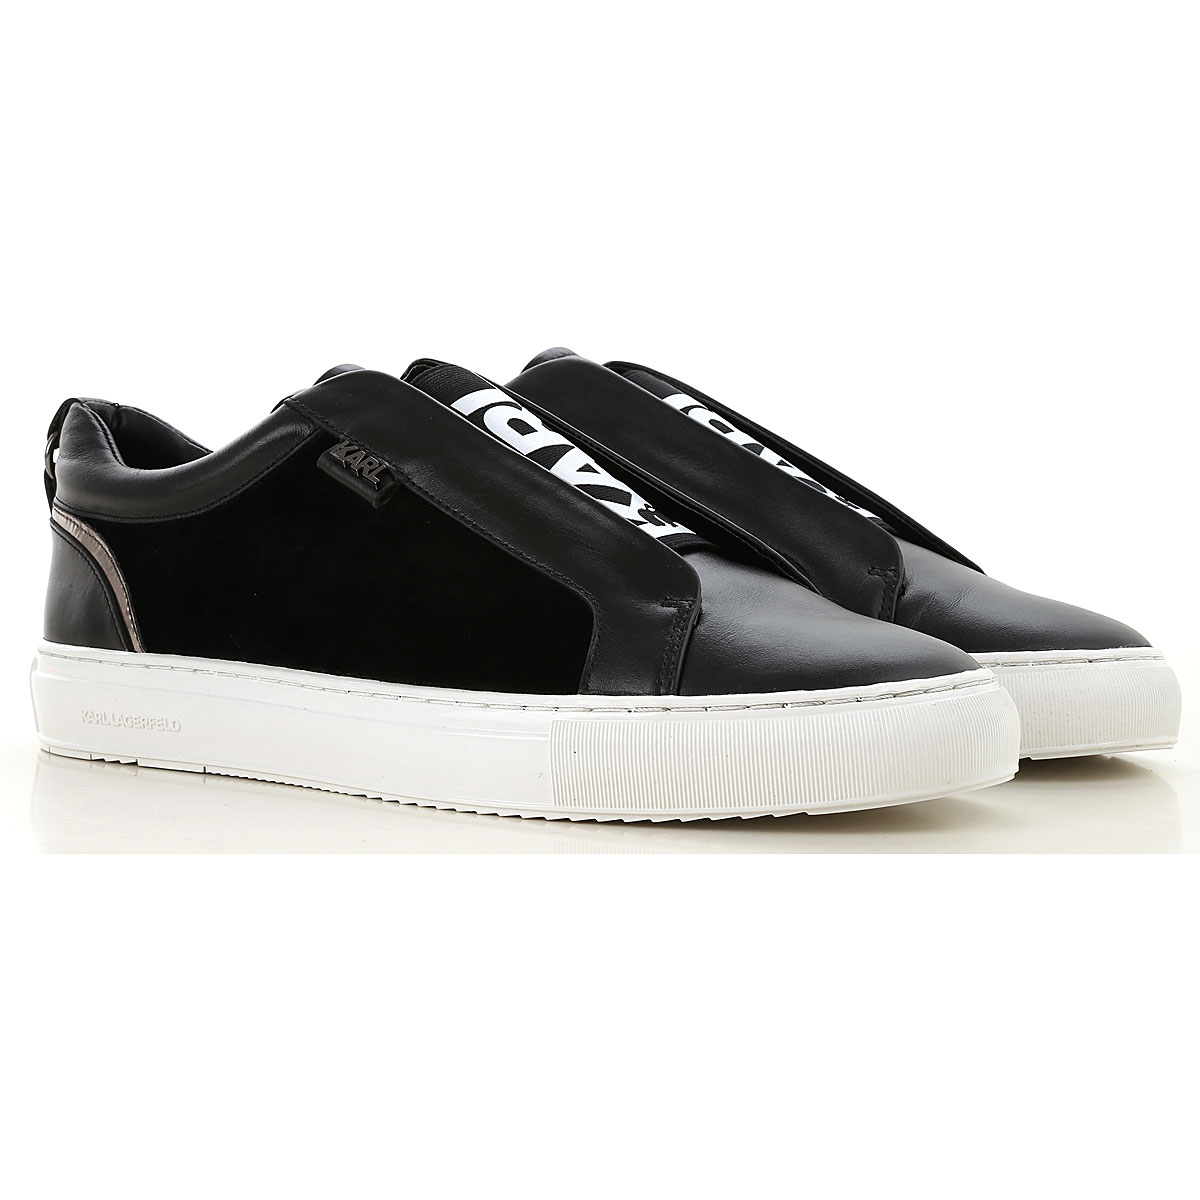 Mens Shoes Karl Lagerfeld, Style code: 51015-001-